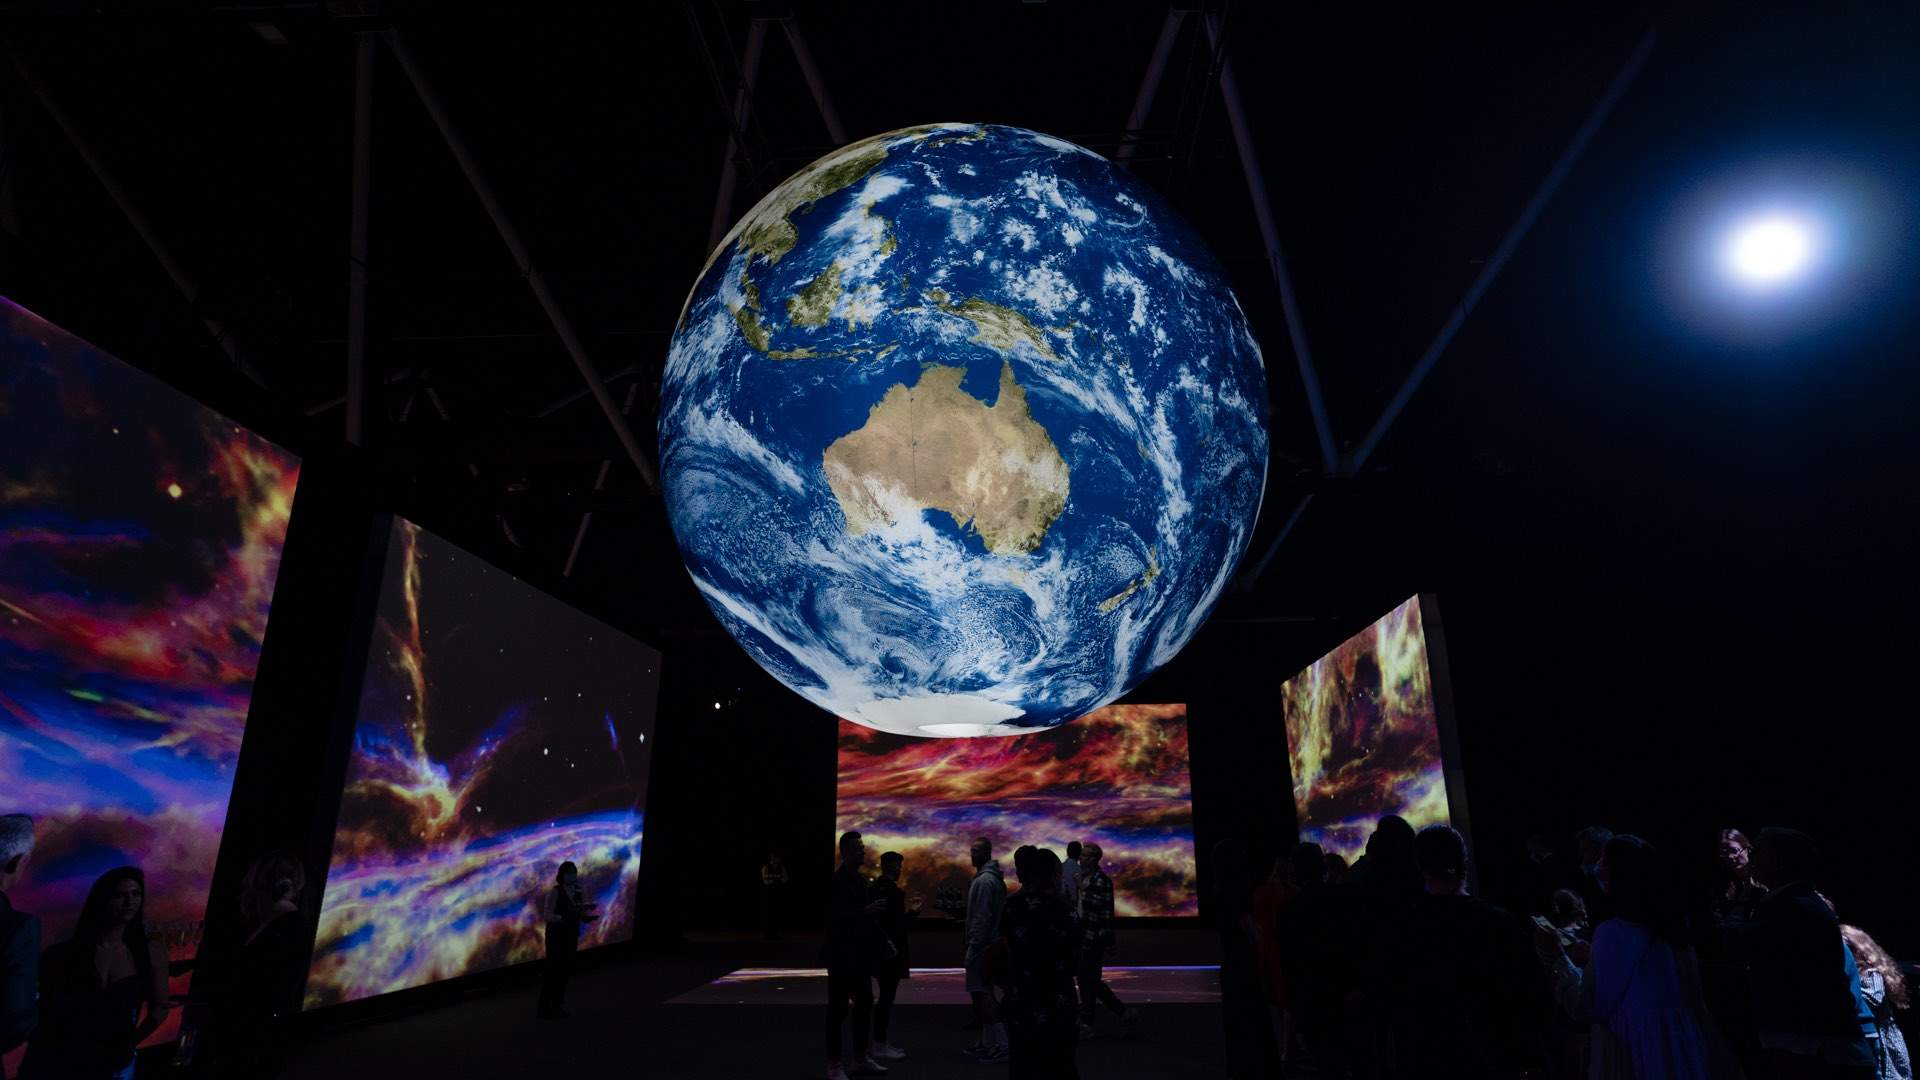 A Look Inside ICC Sydney's Immersive Space Exhibition 'Neighbourhood Earth'